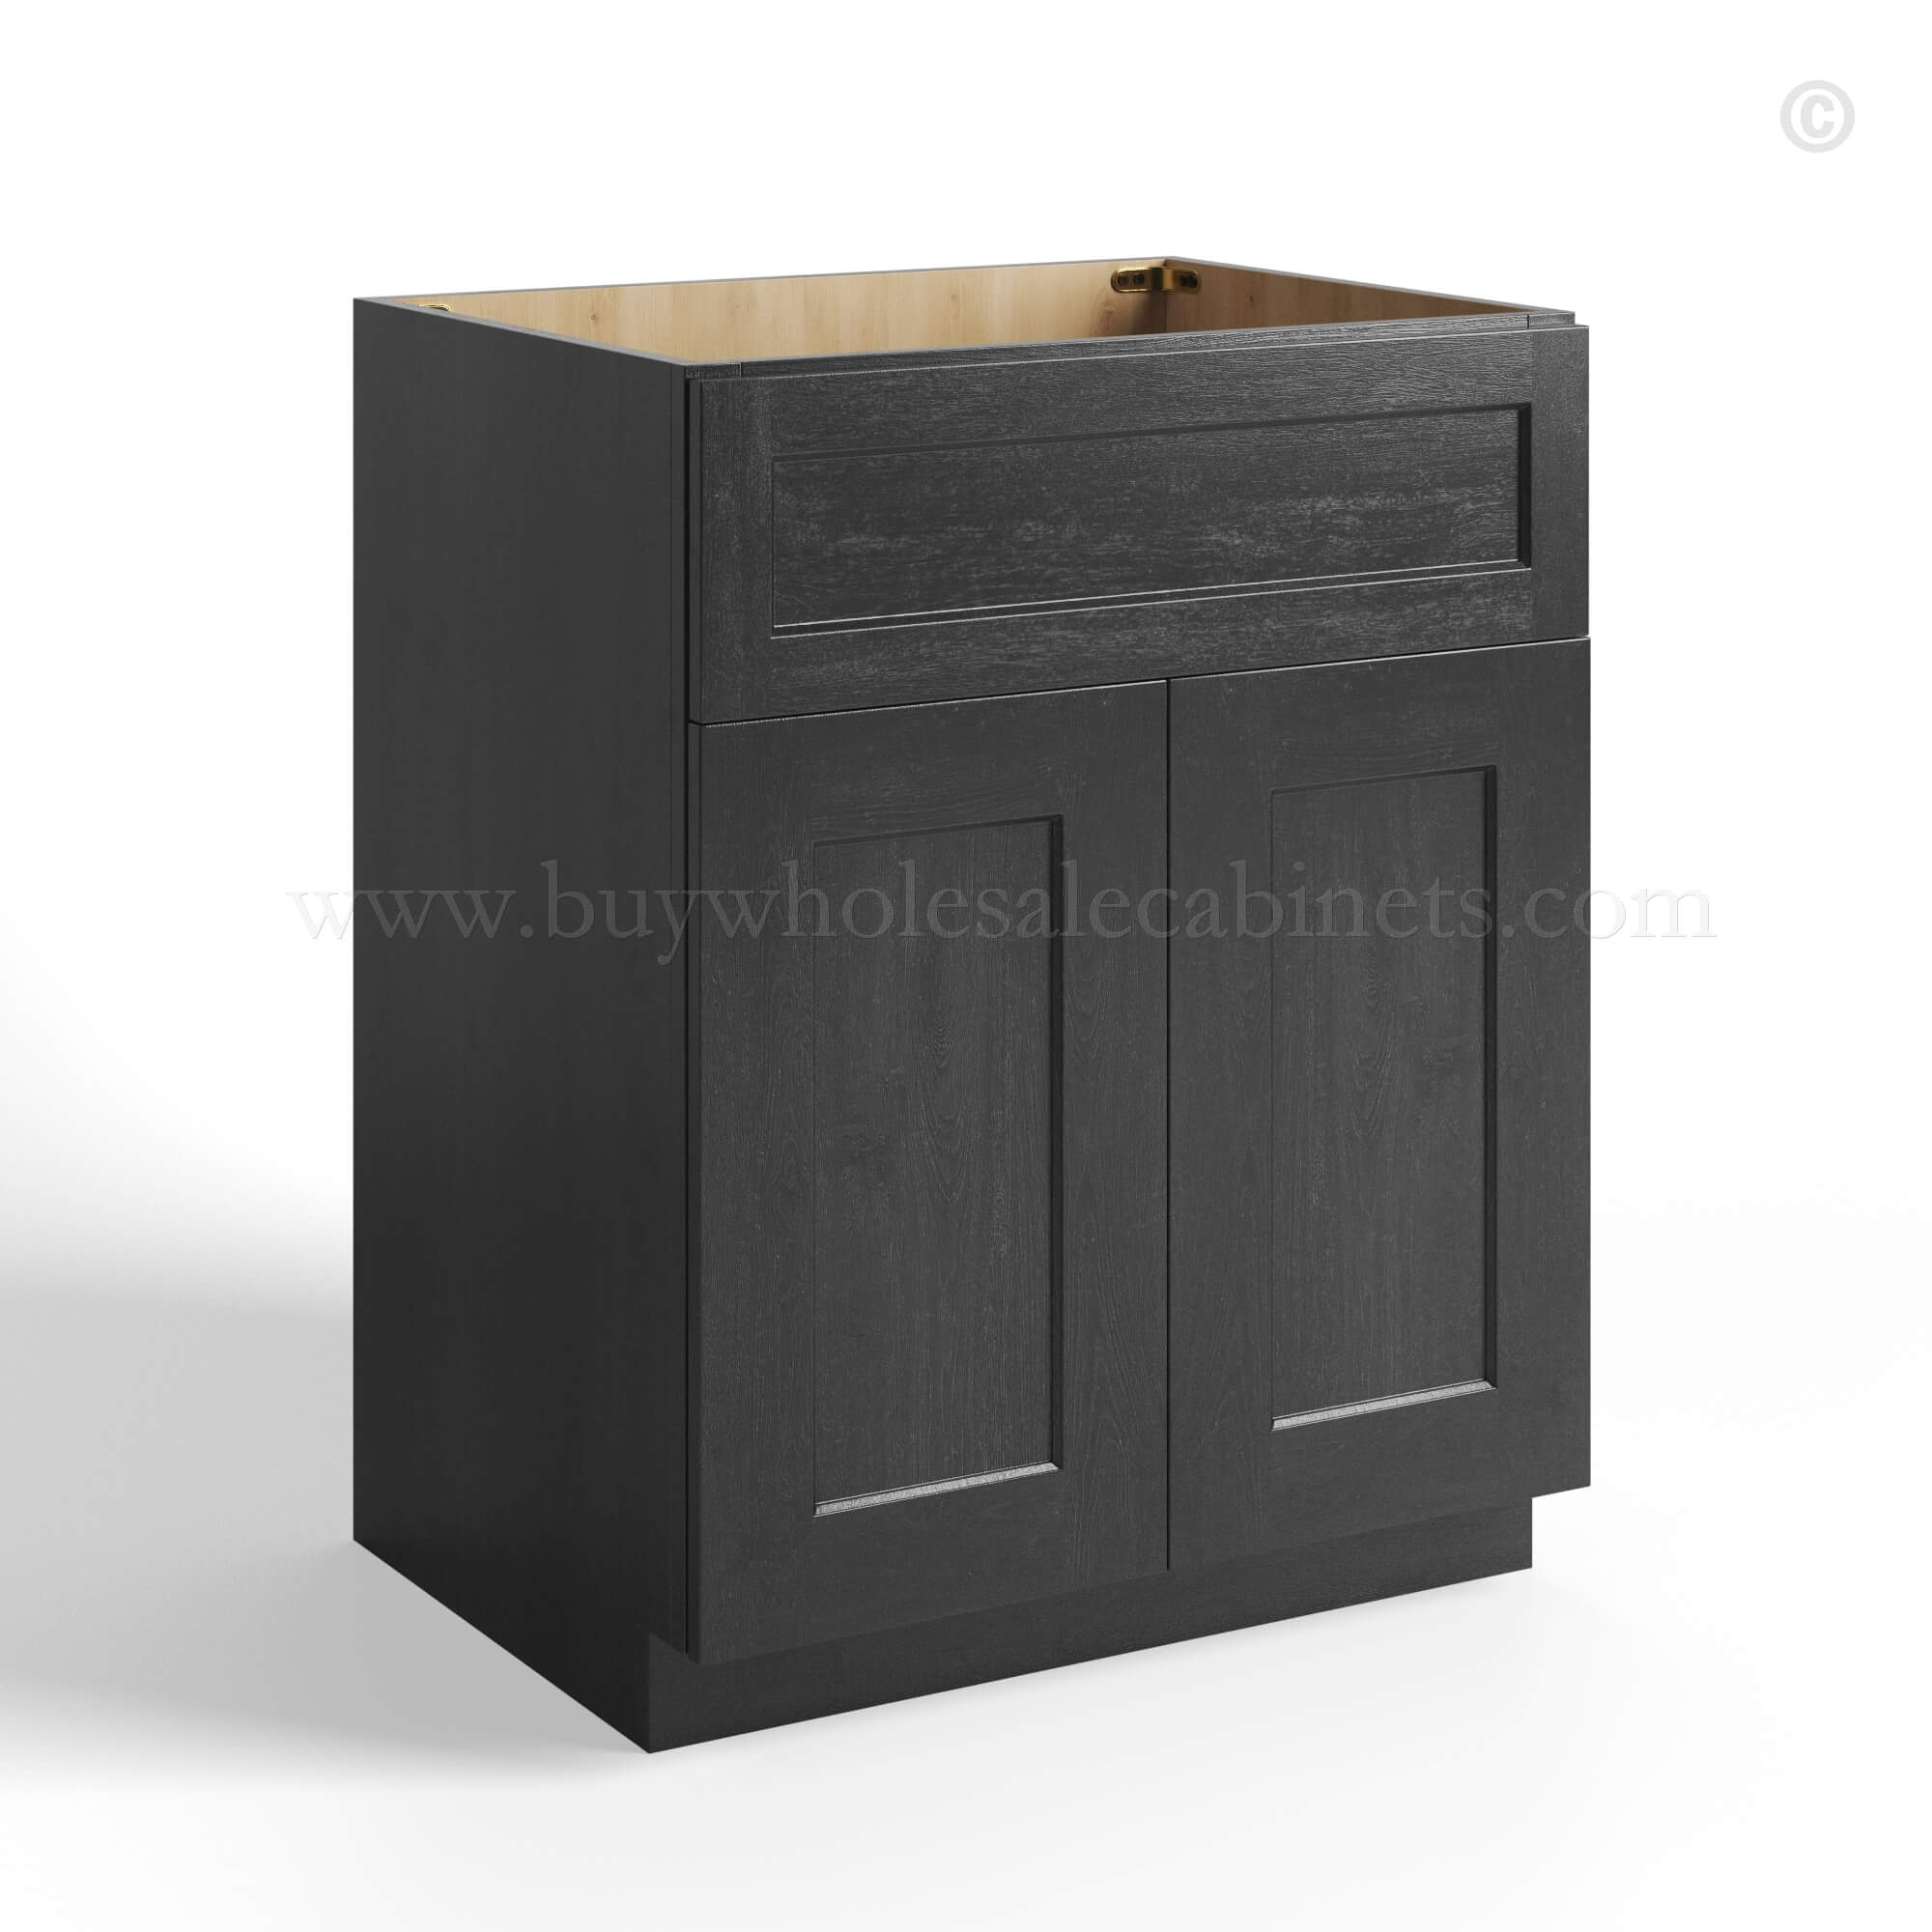 charcoal black shaker vanity sink base cabinet with two doors and single false drawer, rta cabinets, wholesale cabinets